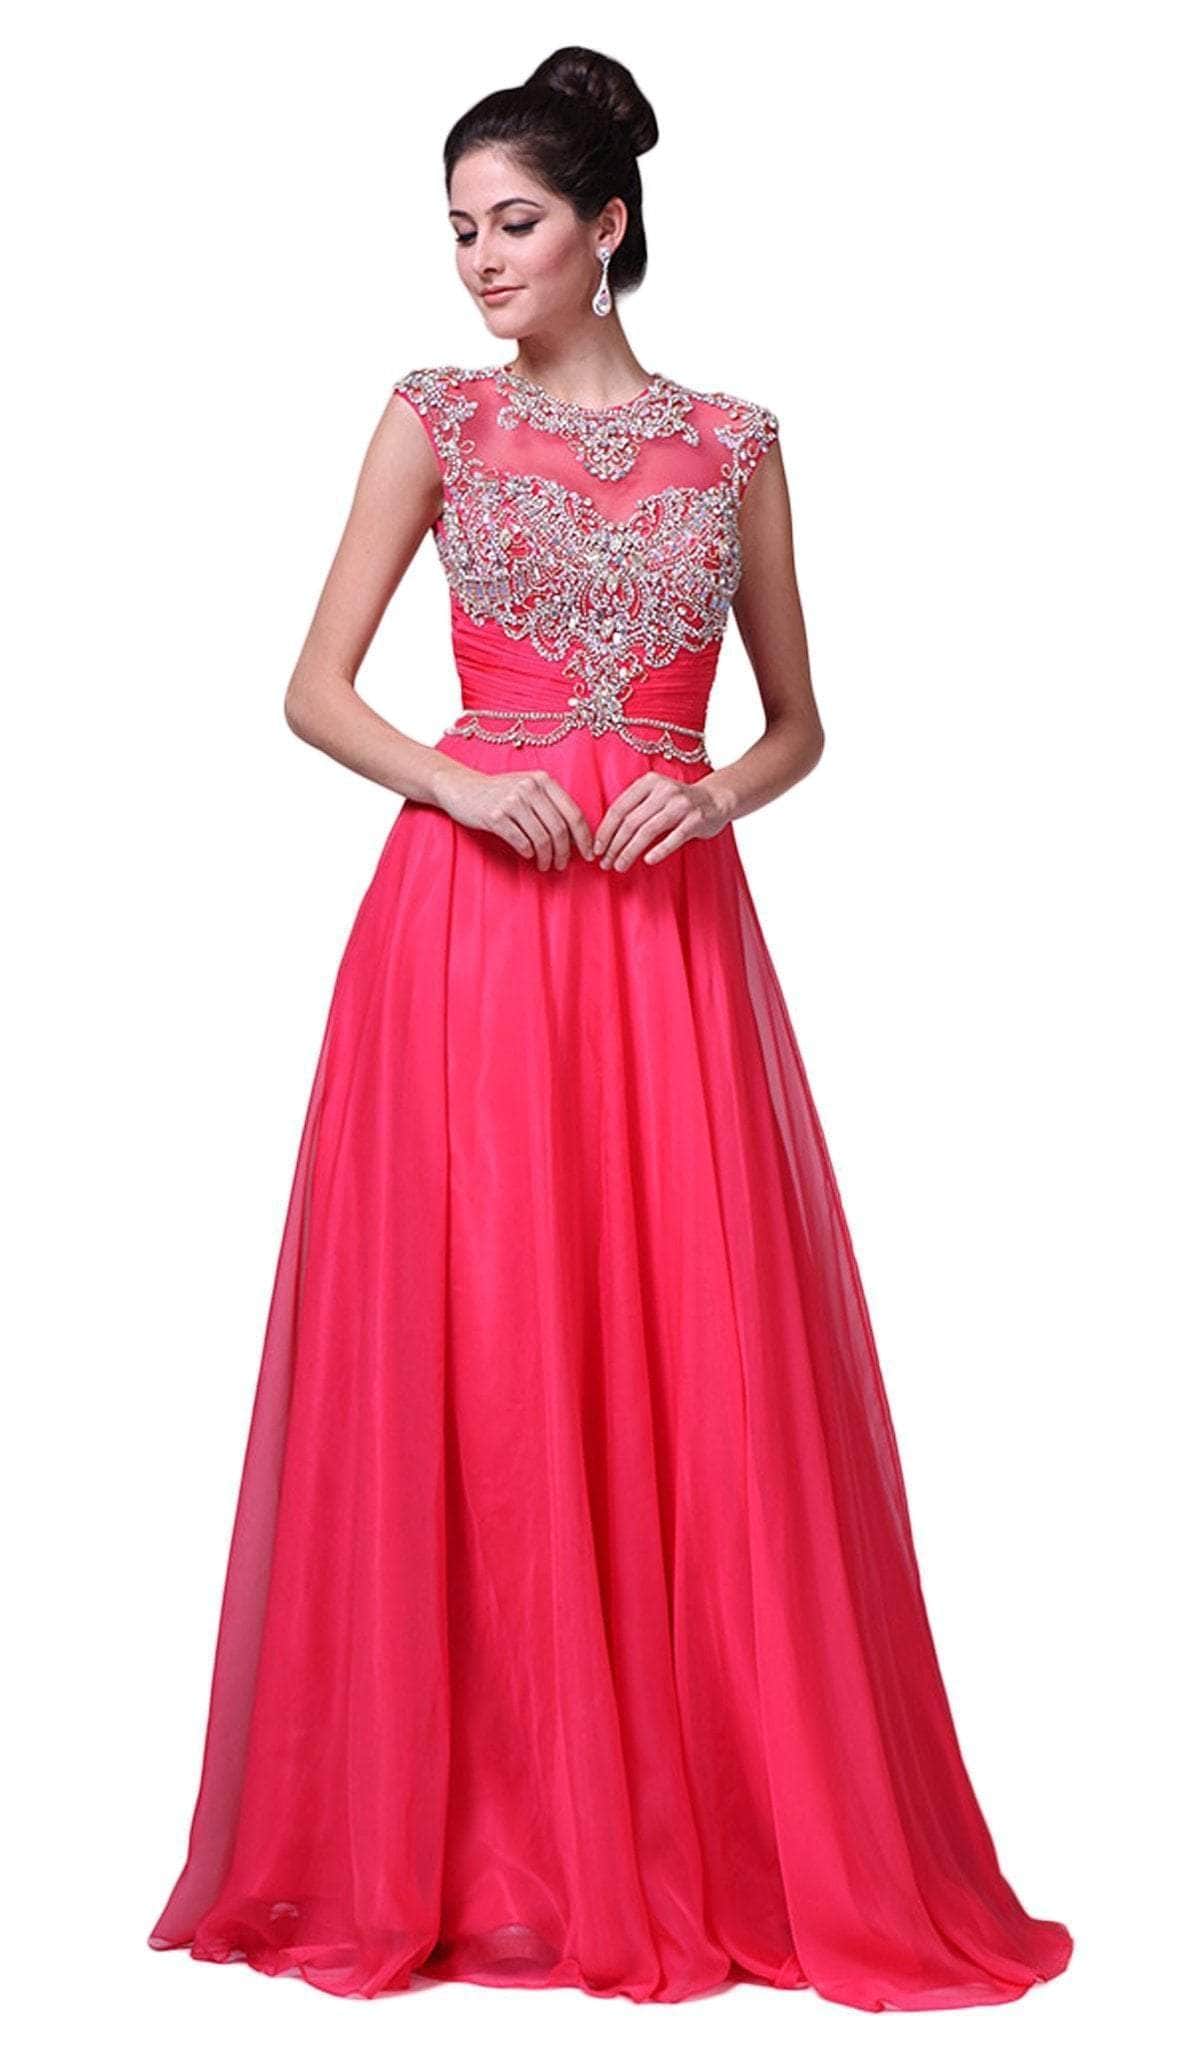 Ladivine 8785 - Crystal Adorned Ruched Evening Gown
